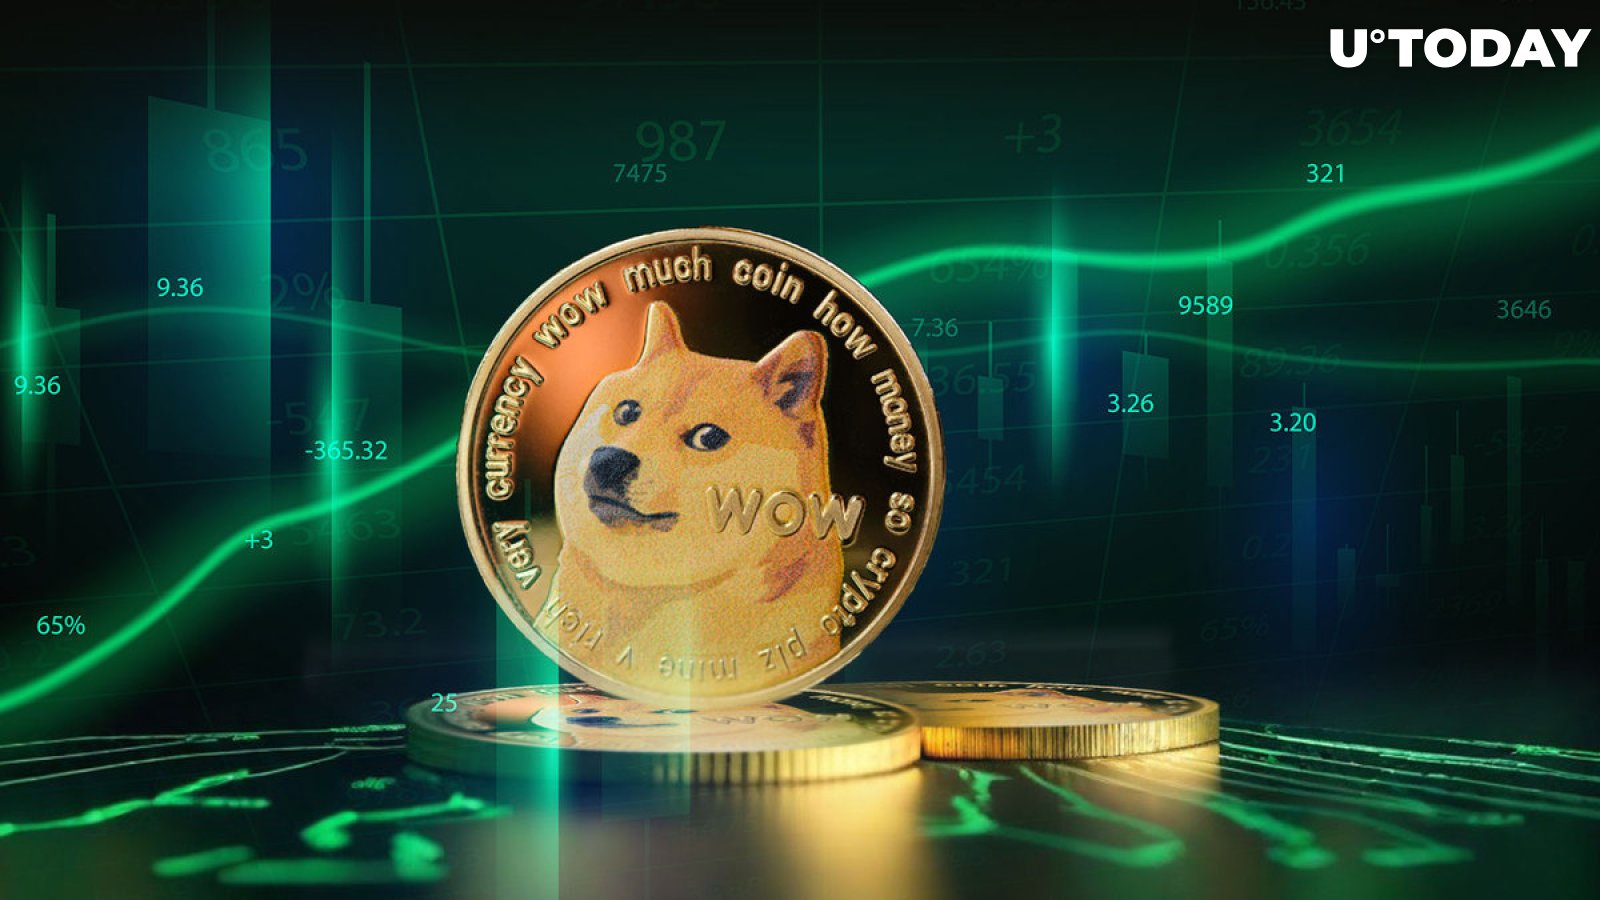 200 Million DOGE: Here's What Dogecoin Whales Are Doing